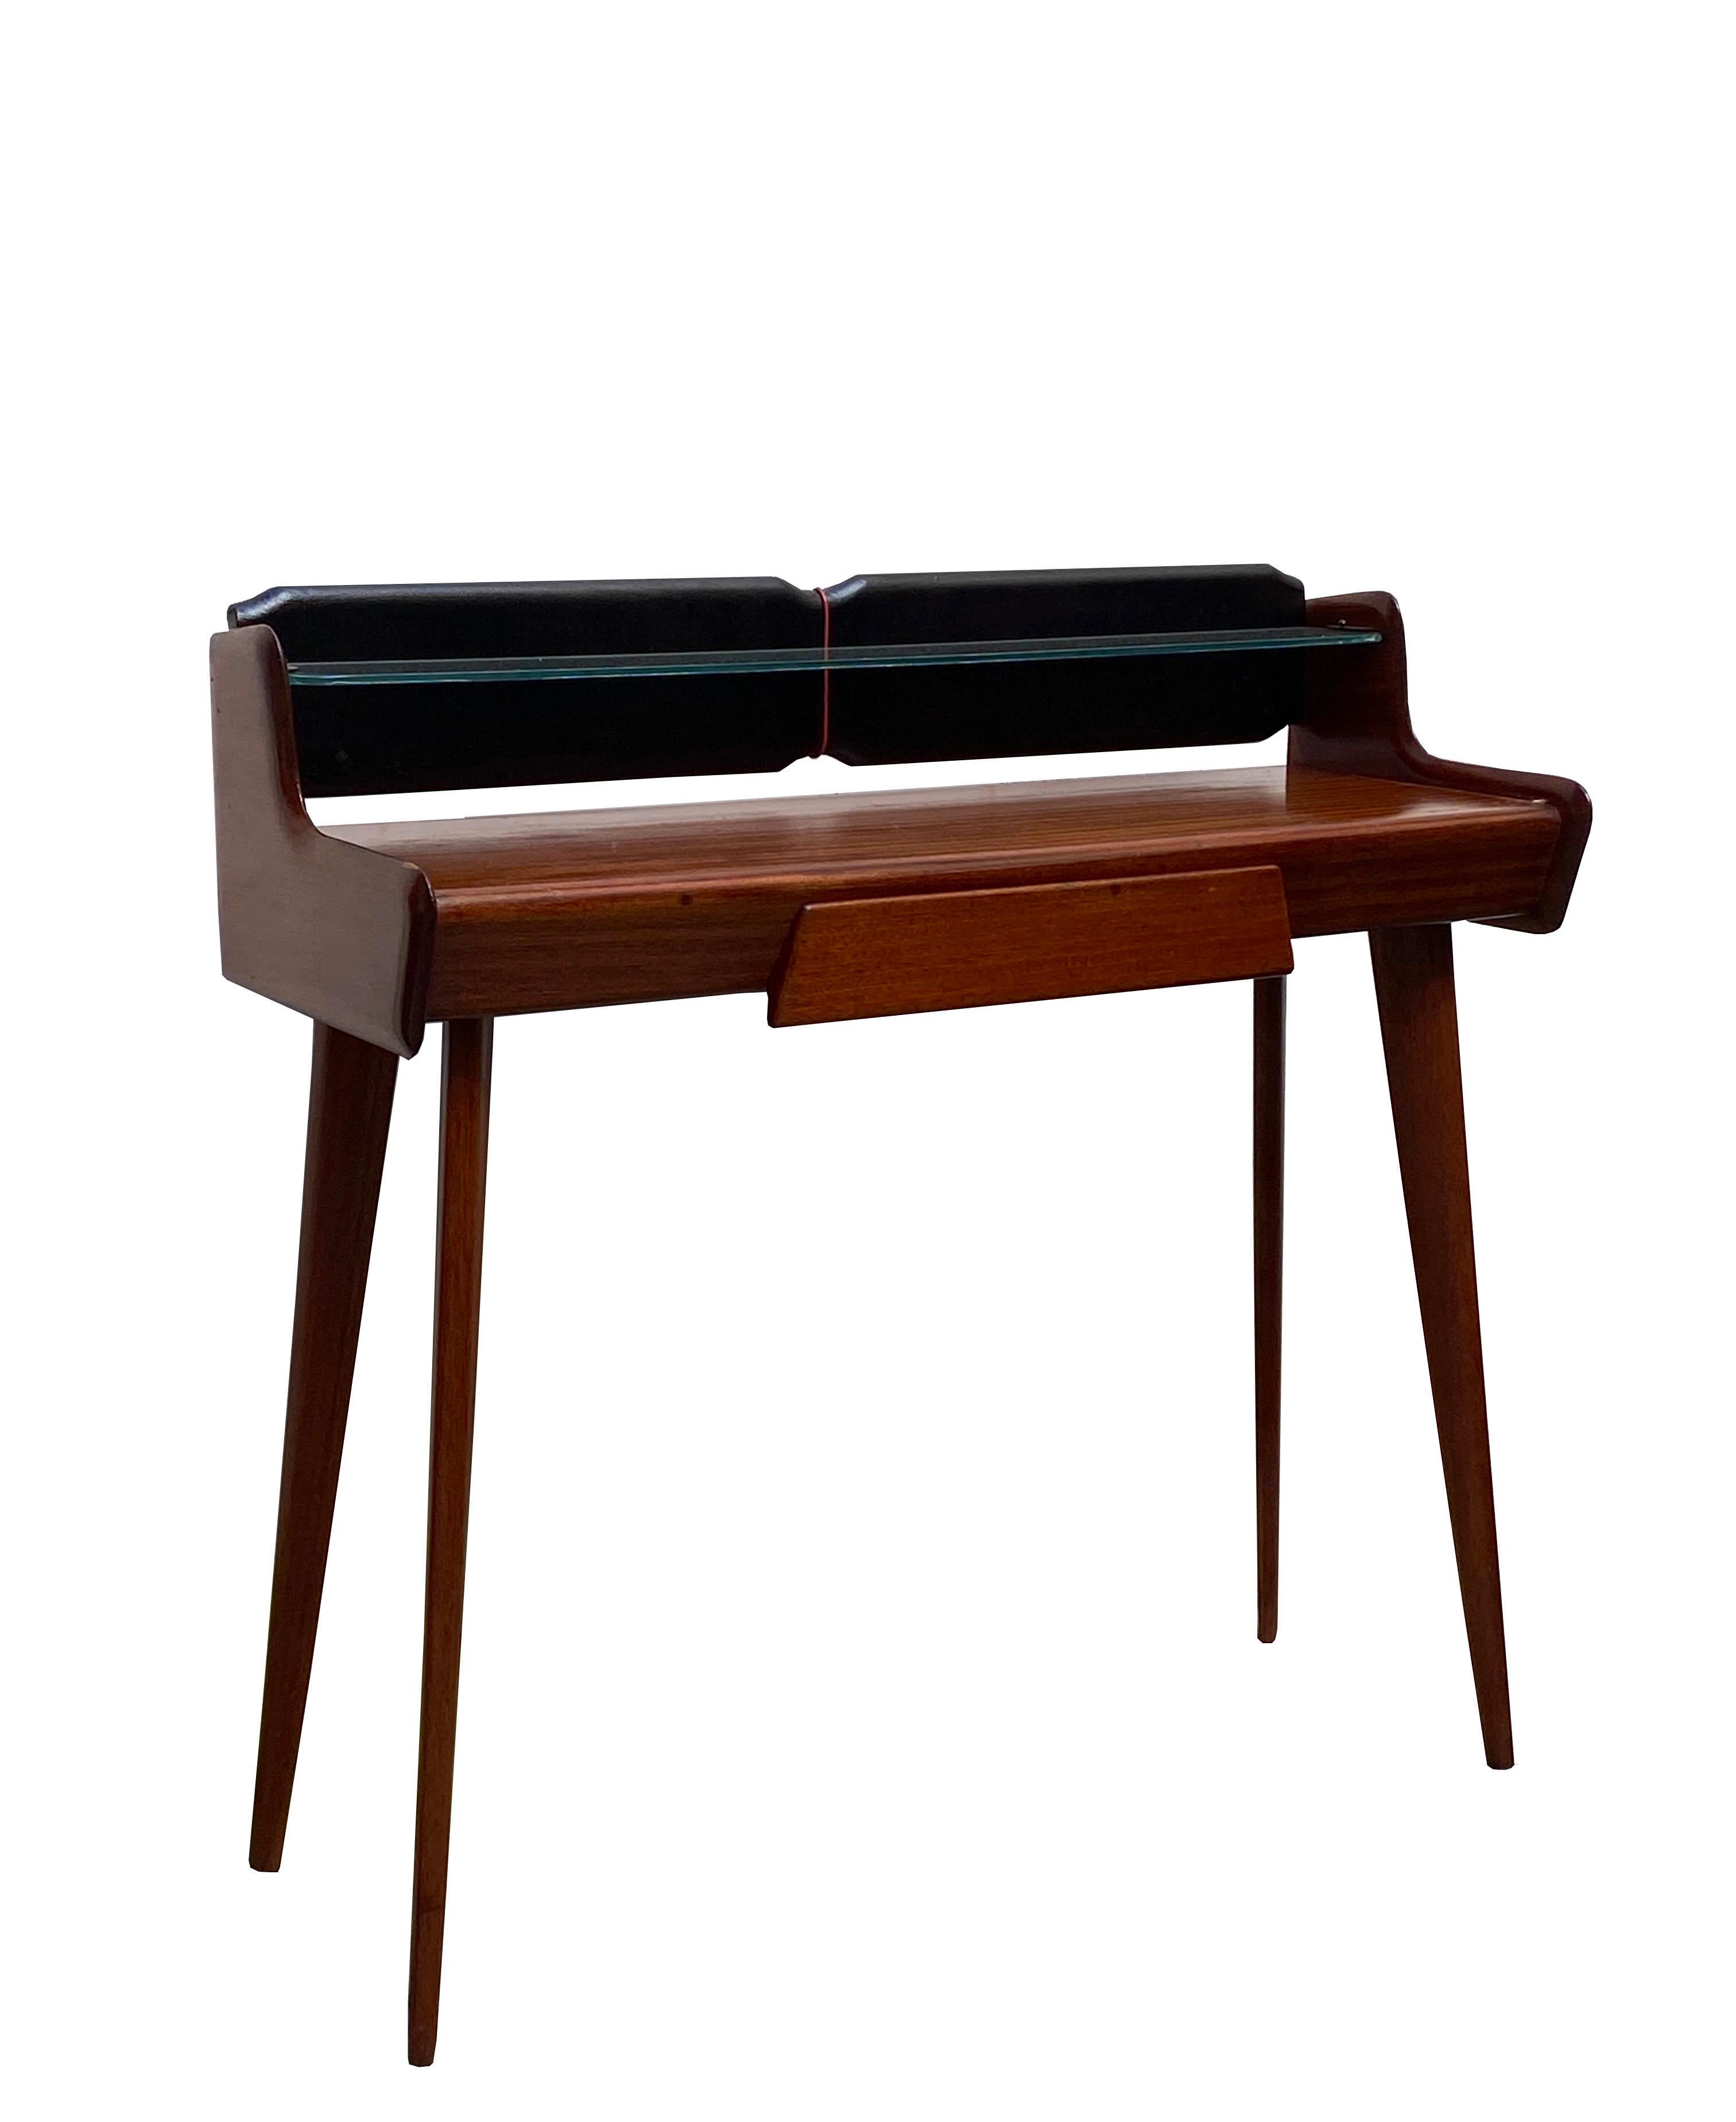 Beautiful mid-century Italian wooden console table by Carlo di Carli. There is a central drawer and a glass shelf on each piece.